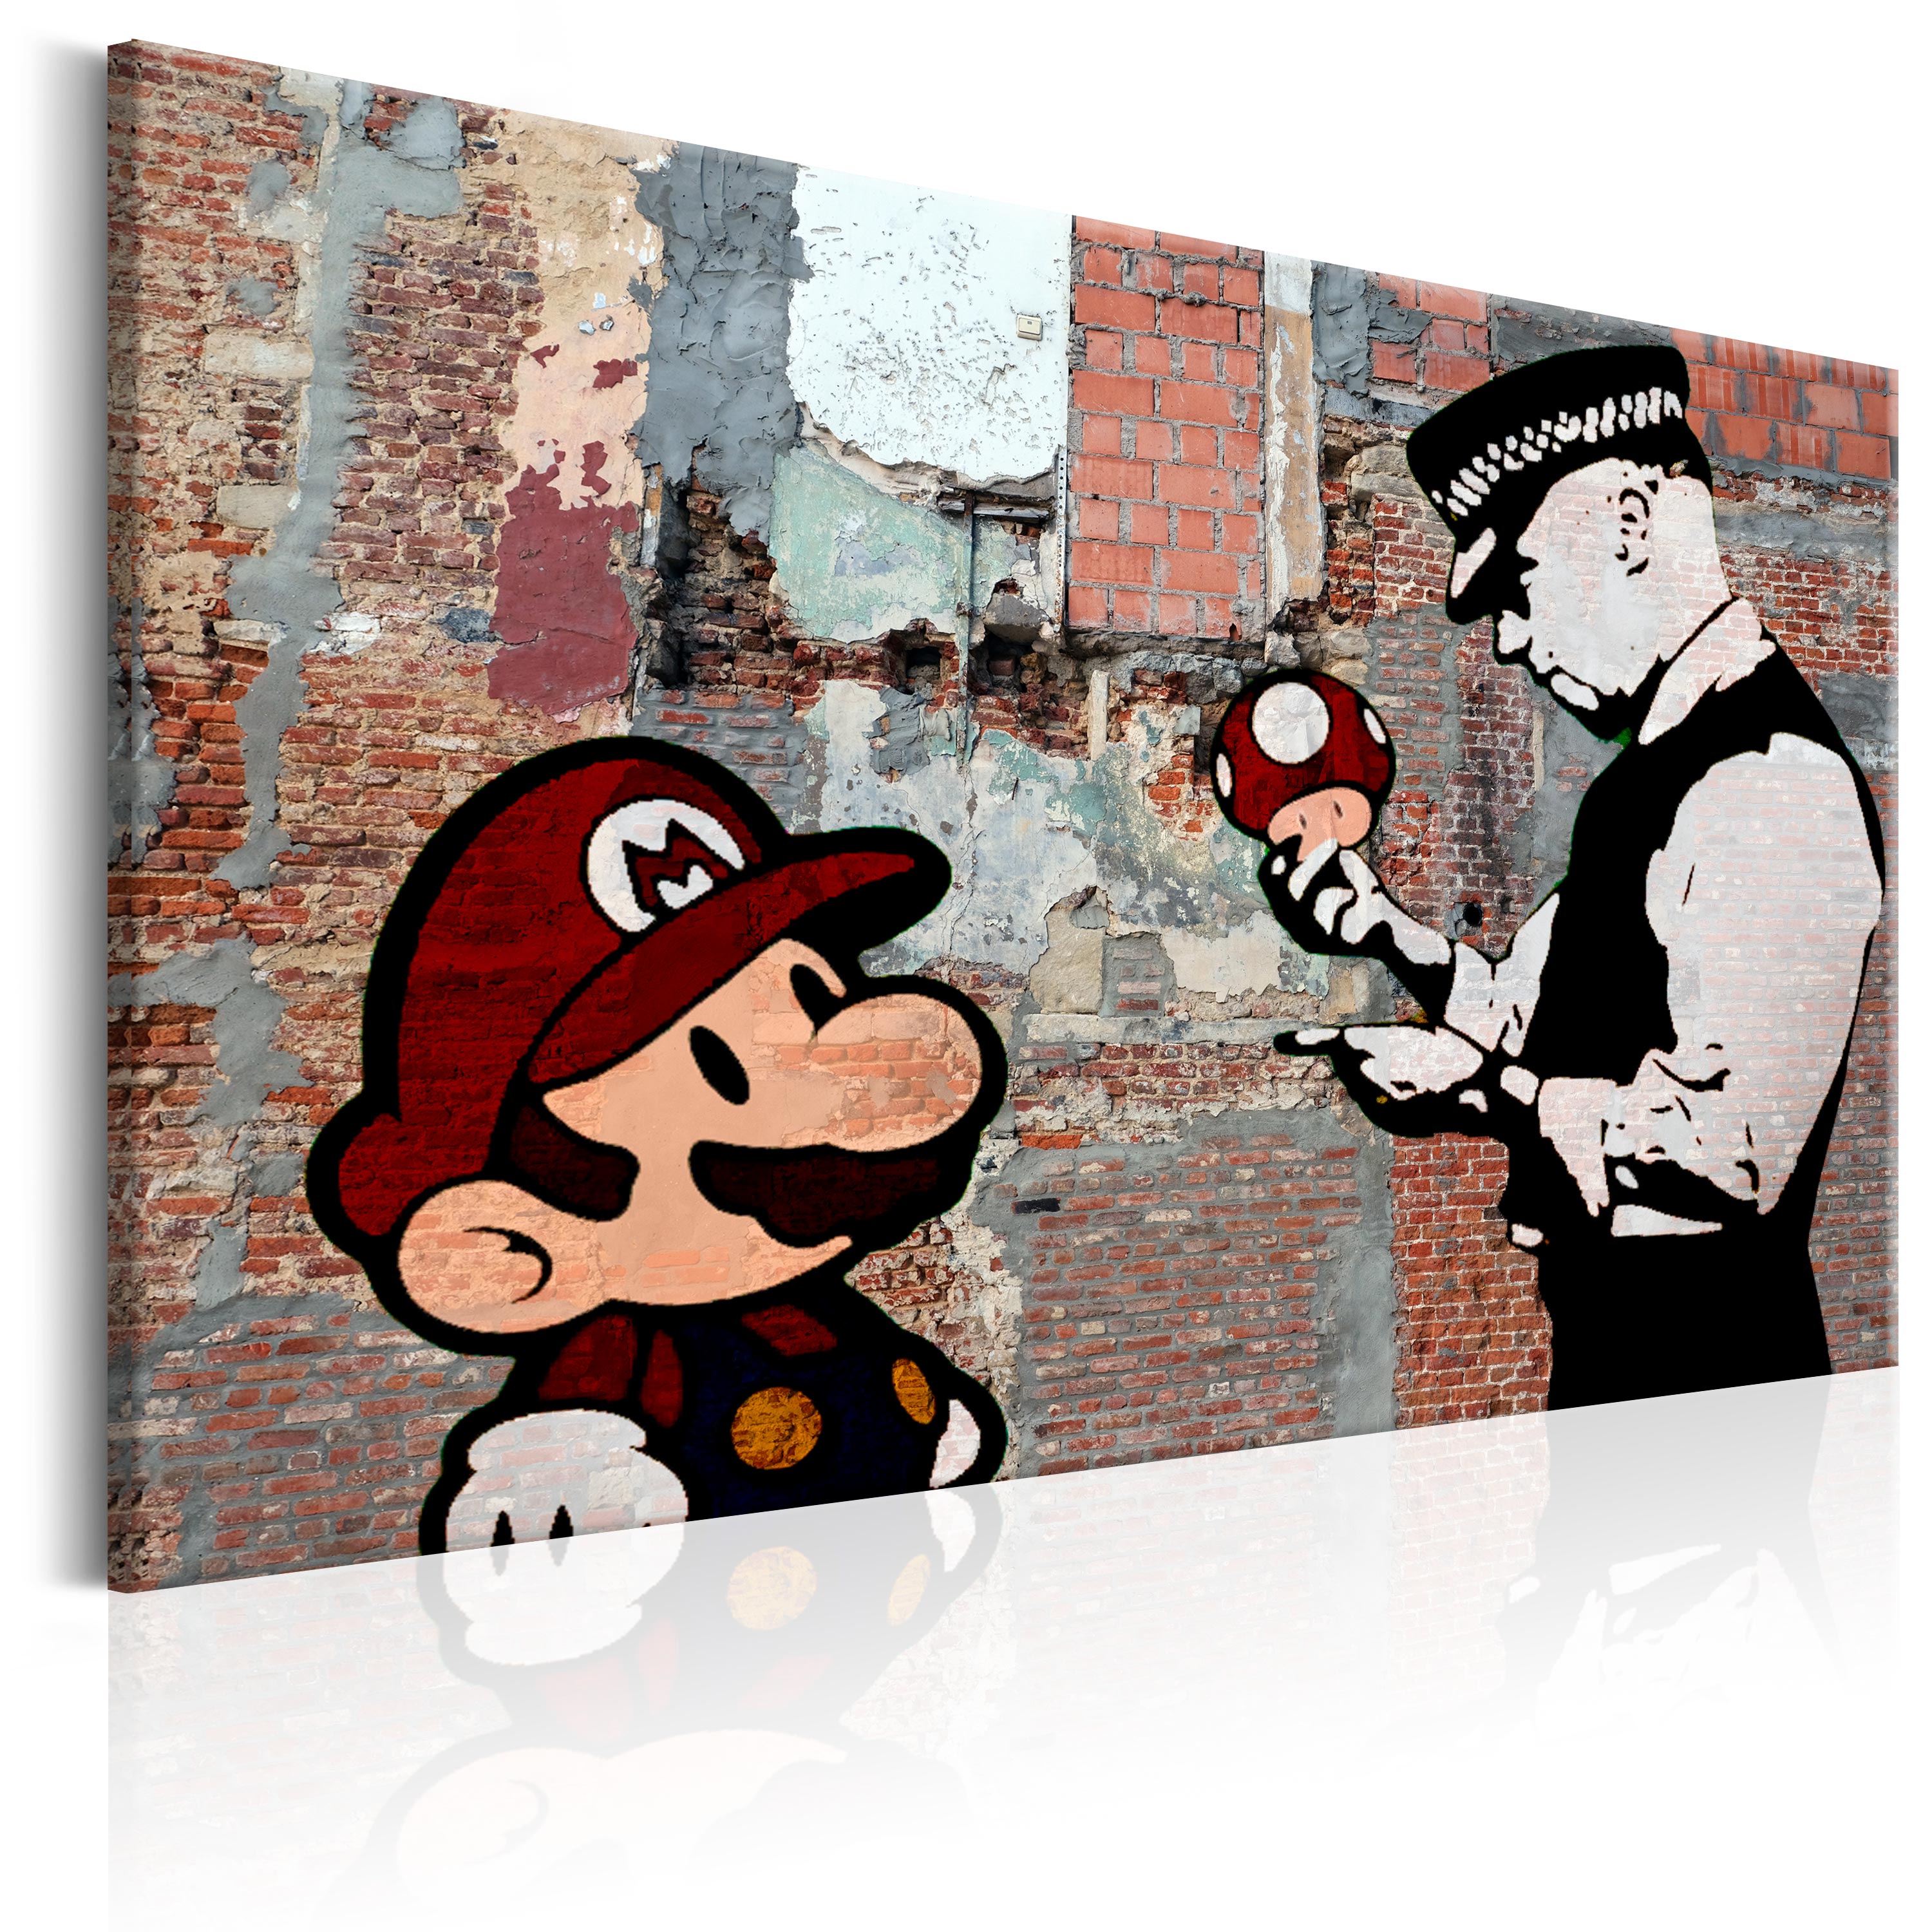 Canvas Print - Banksy: One Last Time - 120x80